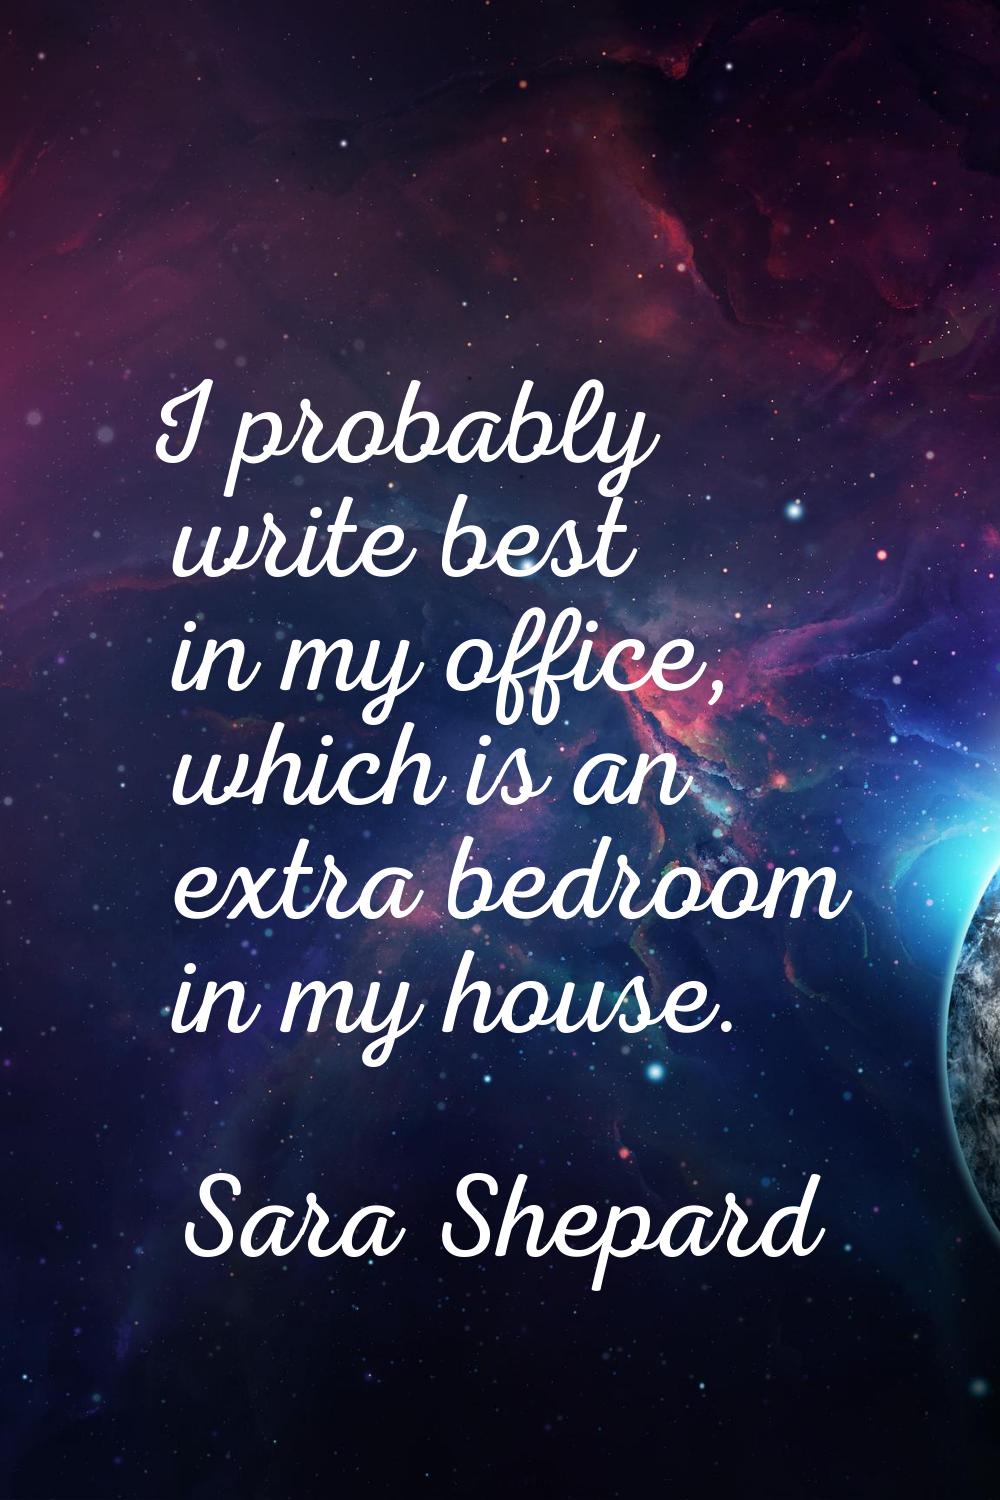 I probably write best in my office, which is an extra bedroom in my house.